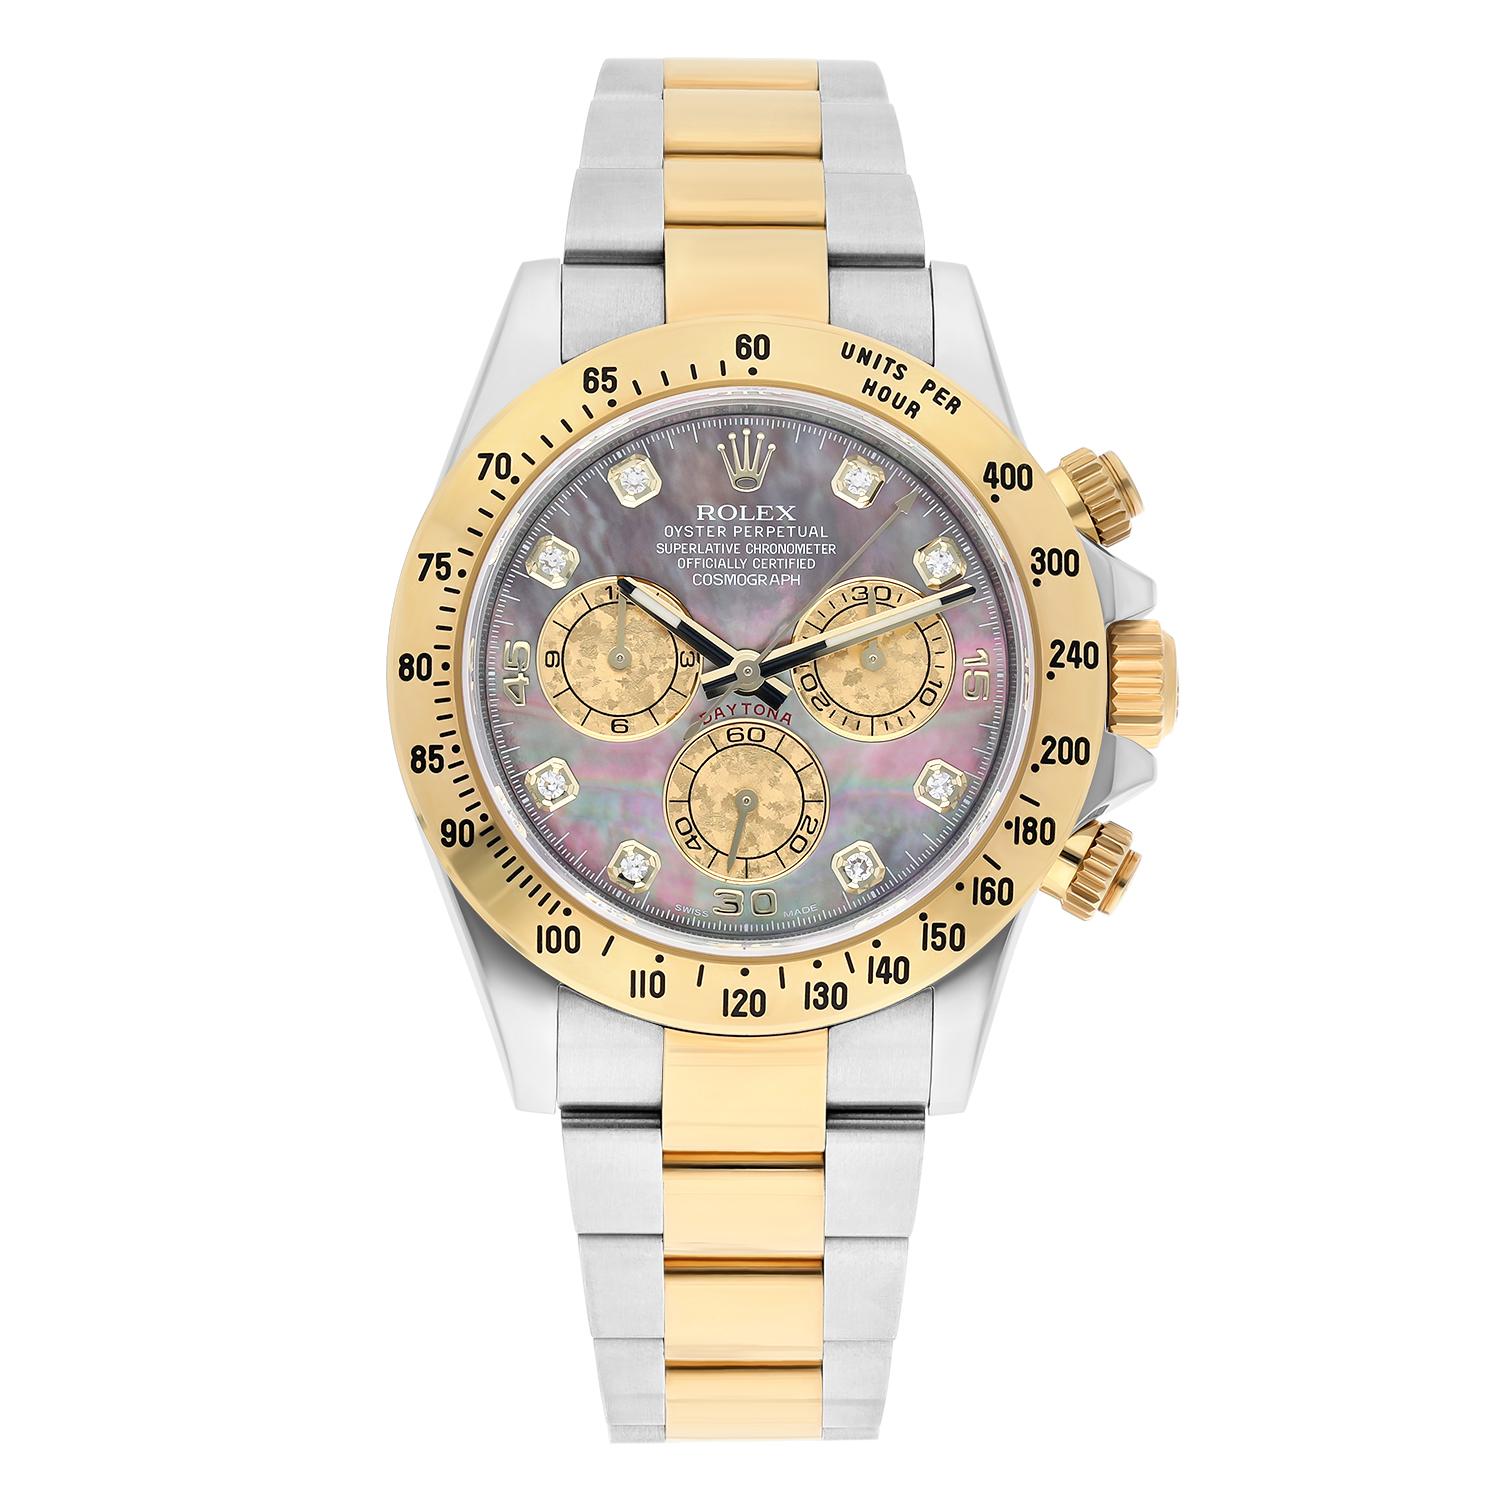 The rare diamond set dial on this 18ct yellow gold & steel 116523 Daytona is absolutely magnificent. The gold crystal sub-dials contrast beautifully against the stormy dark purples and blues of the natural black mother of pearl. This watch has been